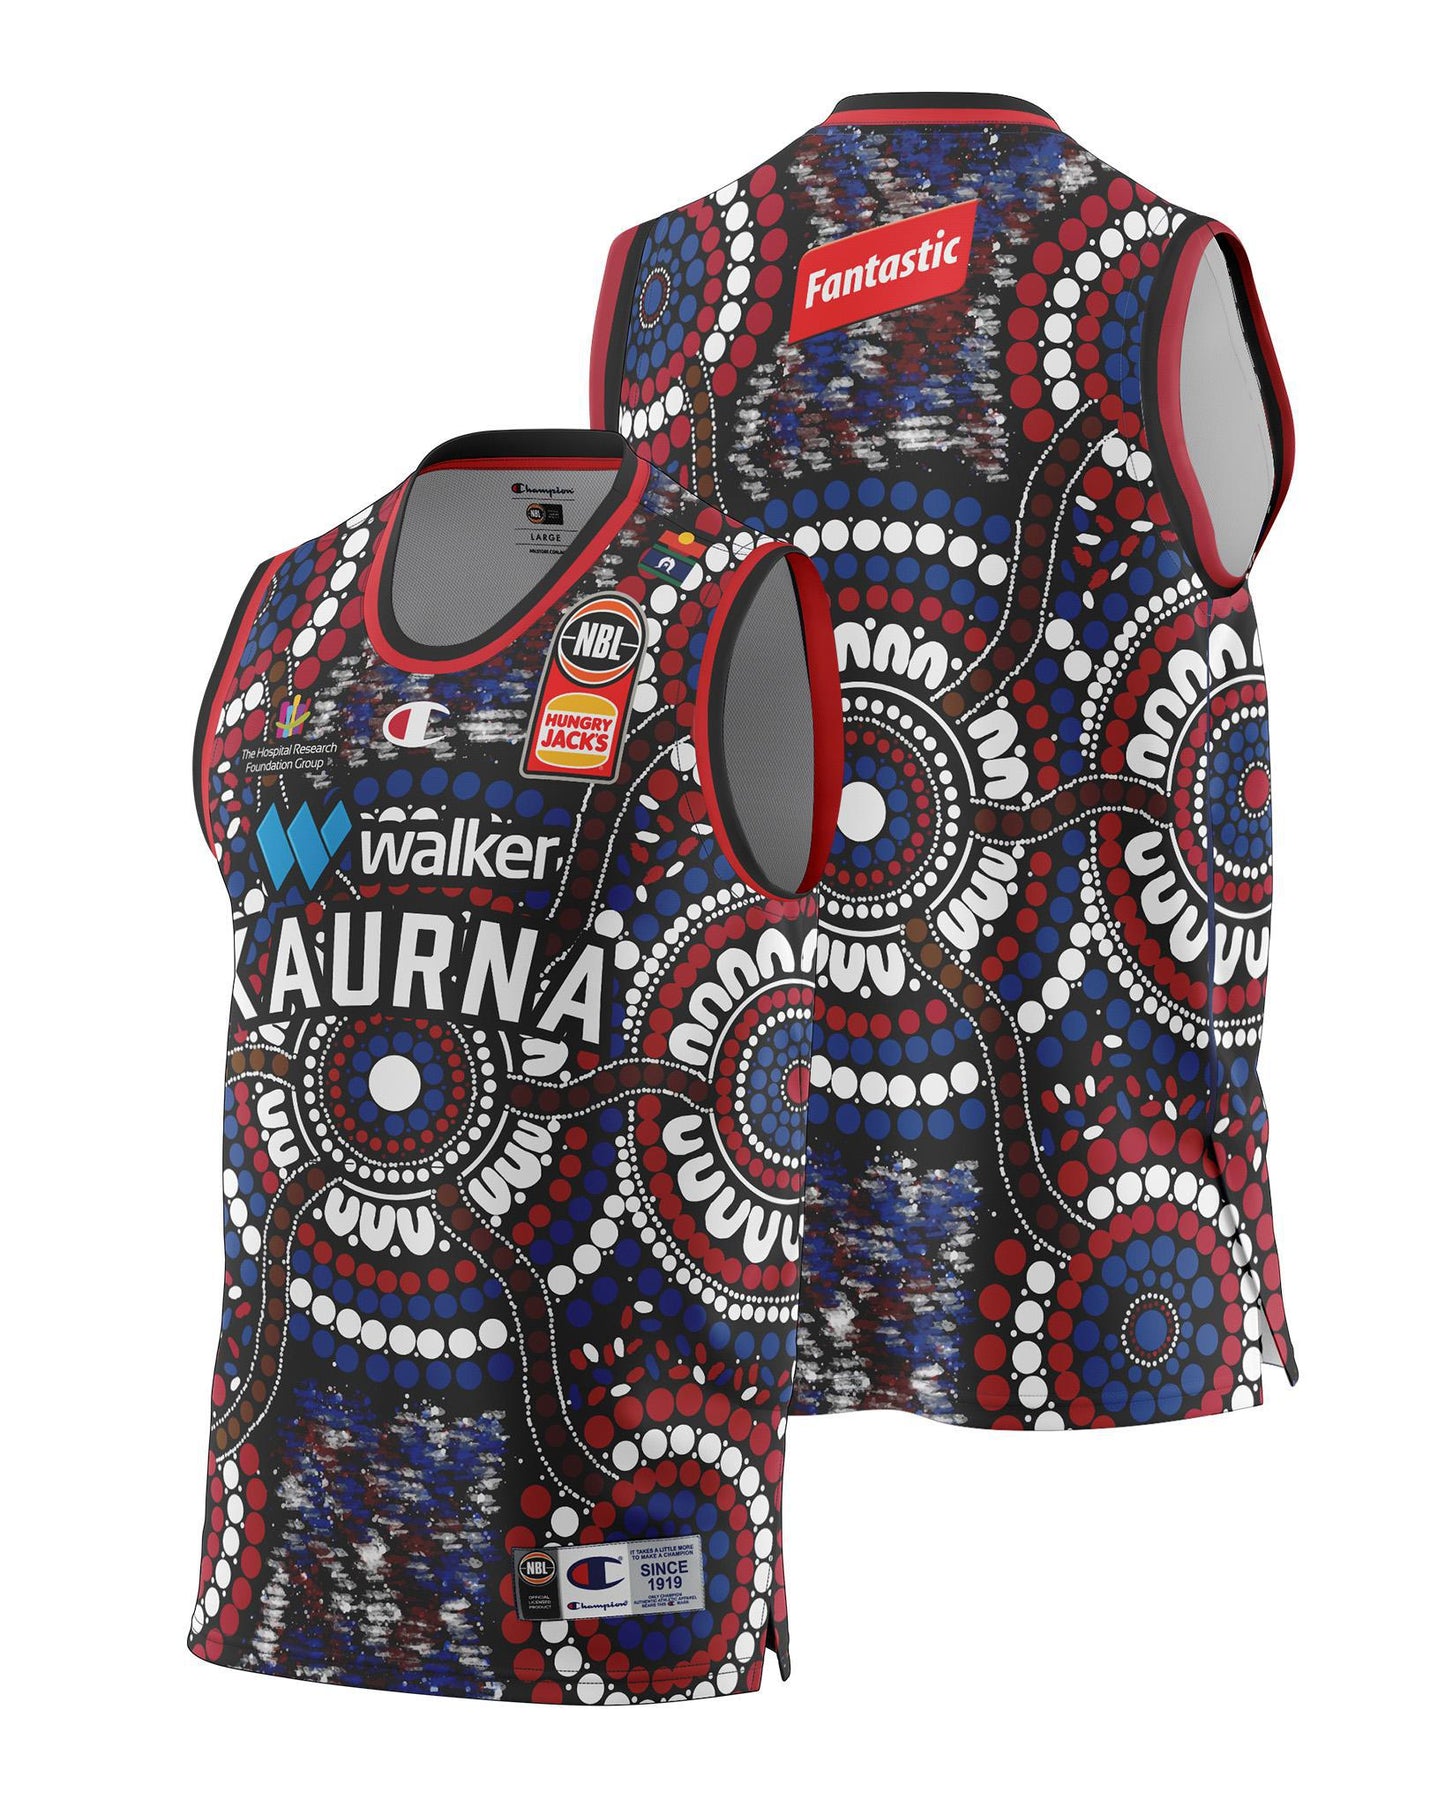 Adelaide 36ers 2021/22 Authentic Adult Indigenous Jersey